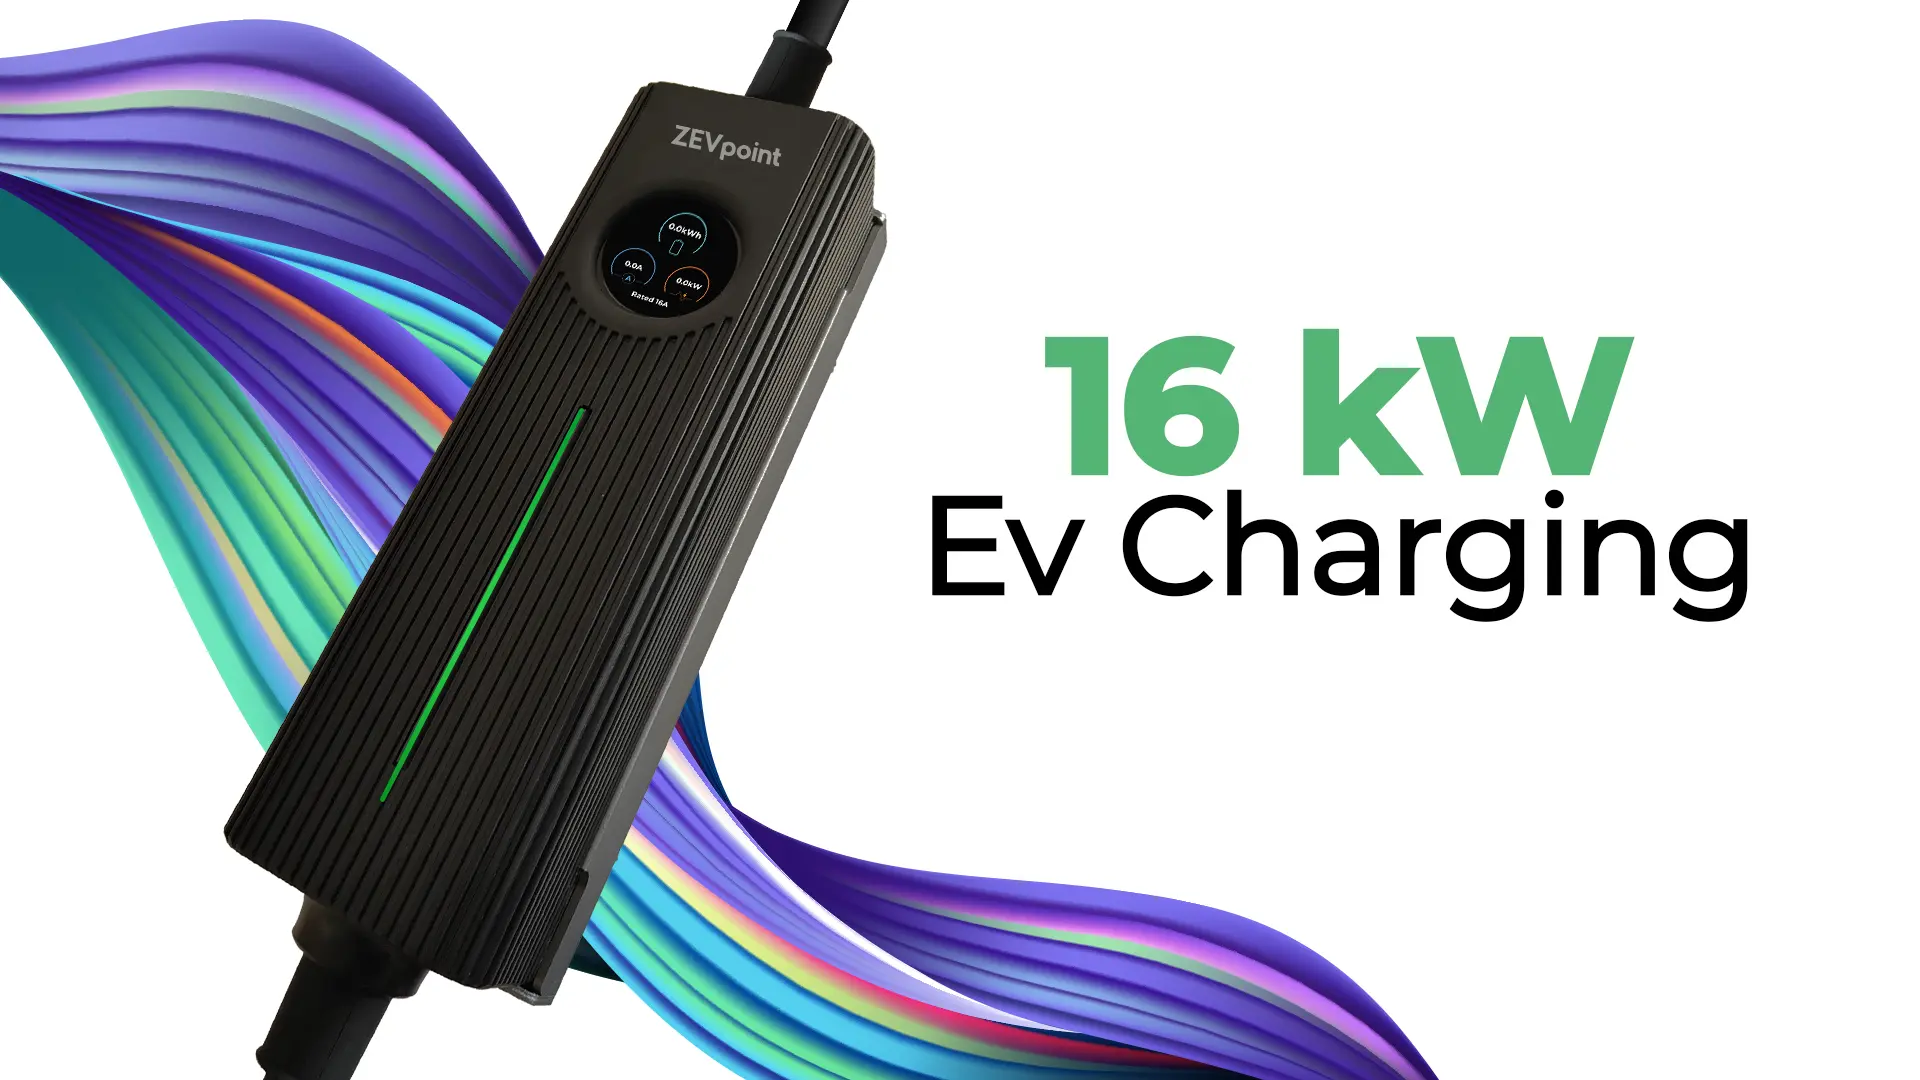 Zevpoint: 16 KW EV Charger Spyder AIO